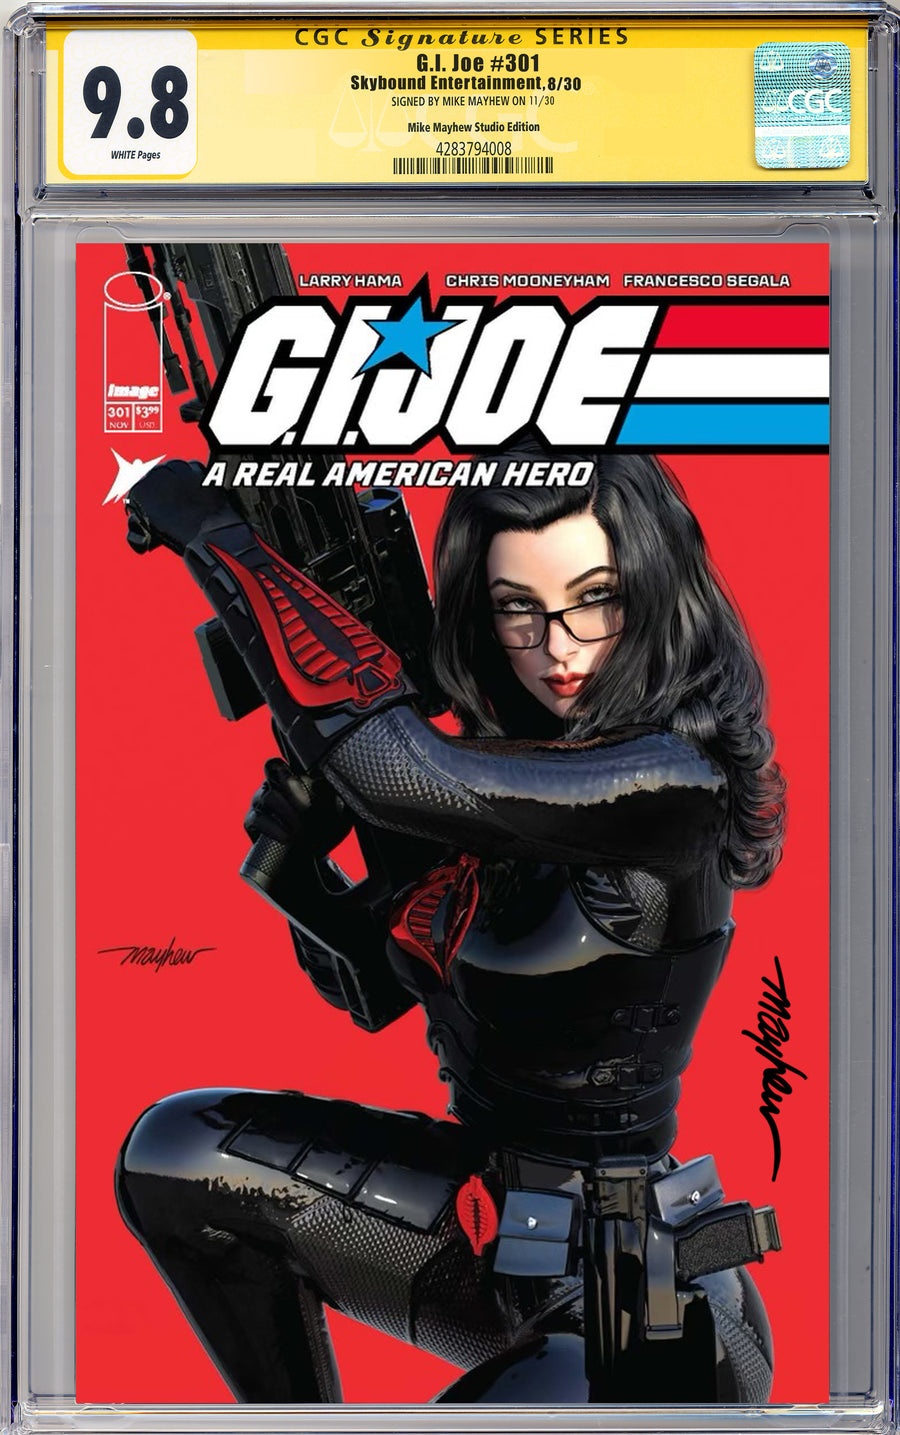 G.I. JOE: A REAL AMERICAN HERO #301 Mike Mayhew Studio Variant Cover A Trade Dress Regular Sig CGC Yellow Label 9.6 and Above Graded Slab